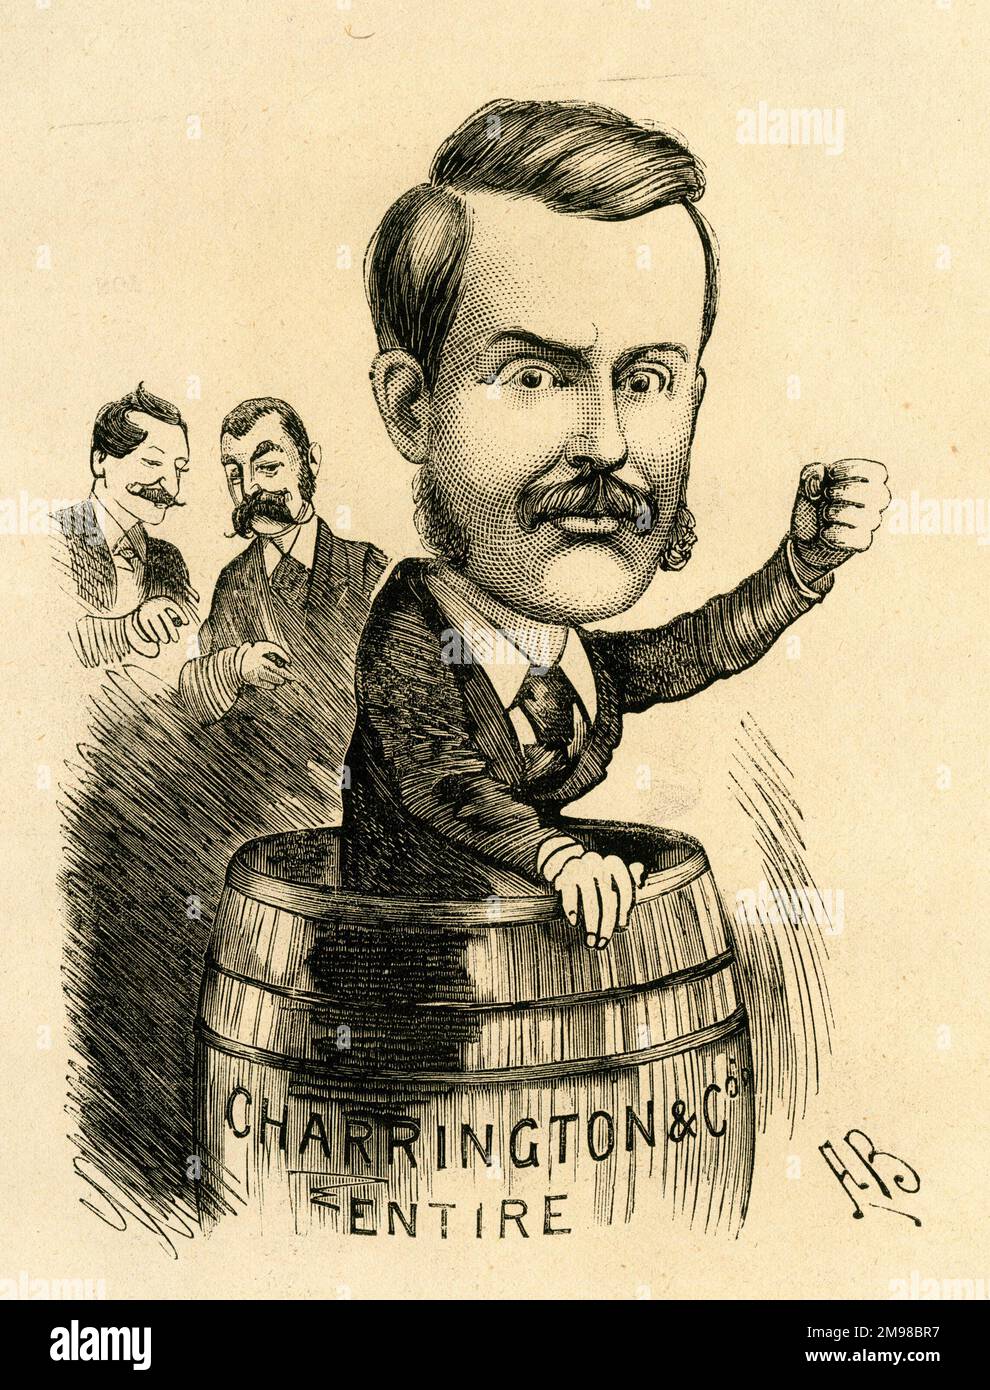 Cartoon, Frederick Nicholas Charrington (1850-1936), English social reformer and evangelical Christian who devoted himself to temperance work. He was a member of the Charrington Brewery family.  The caption reads: A hard-working, East End missionary; he has not yet converted the Middlesex magistrates, though. Stock Photo